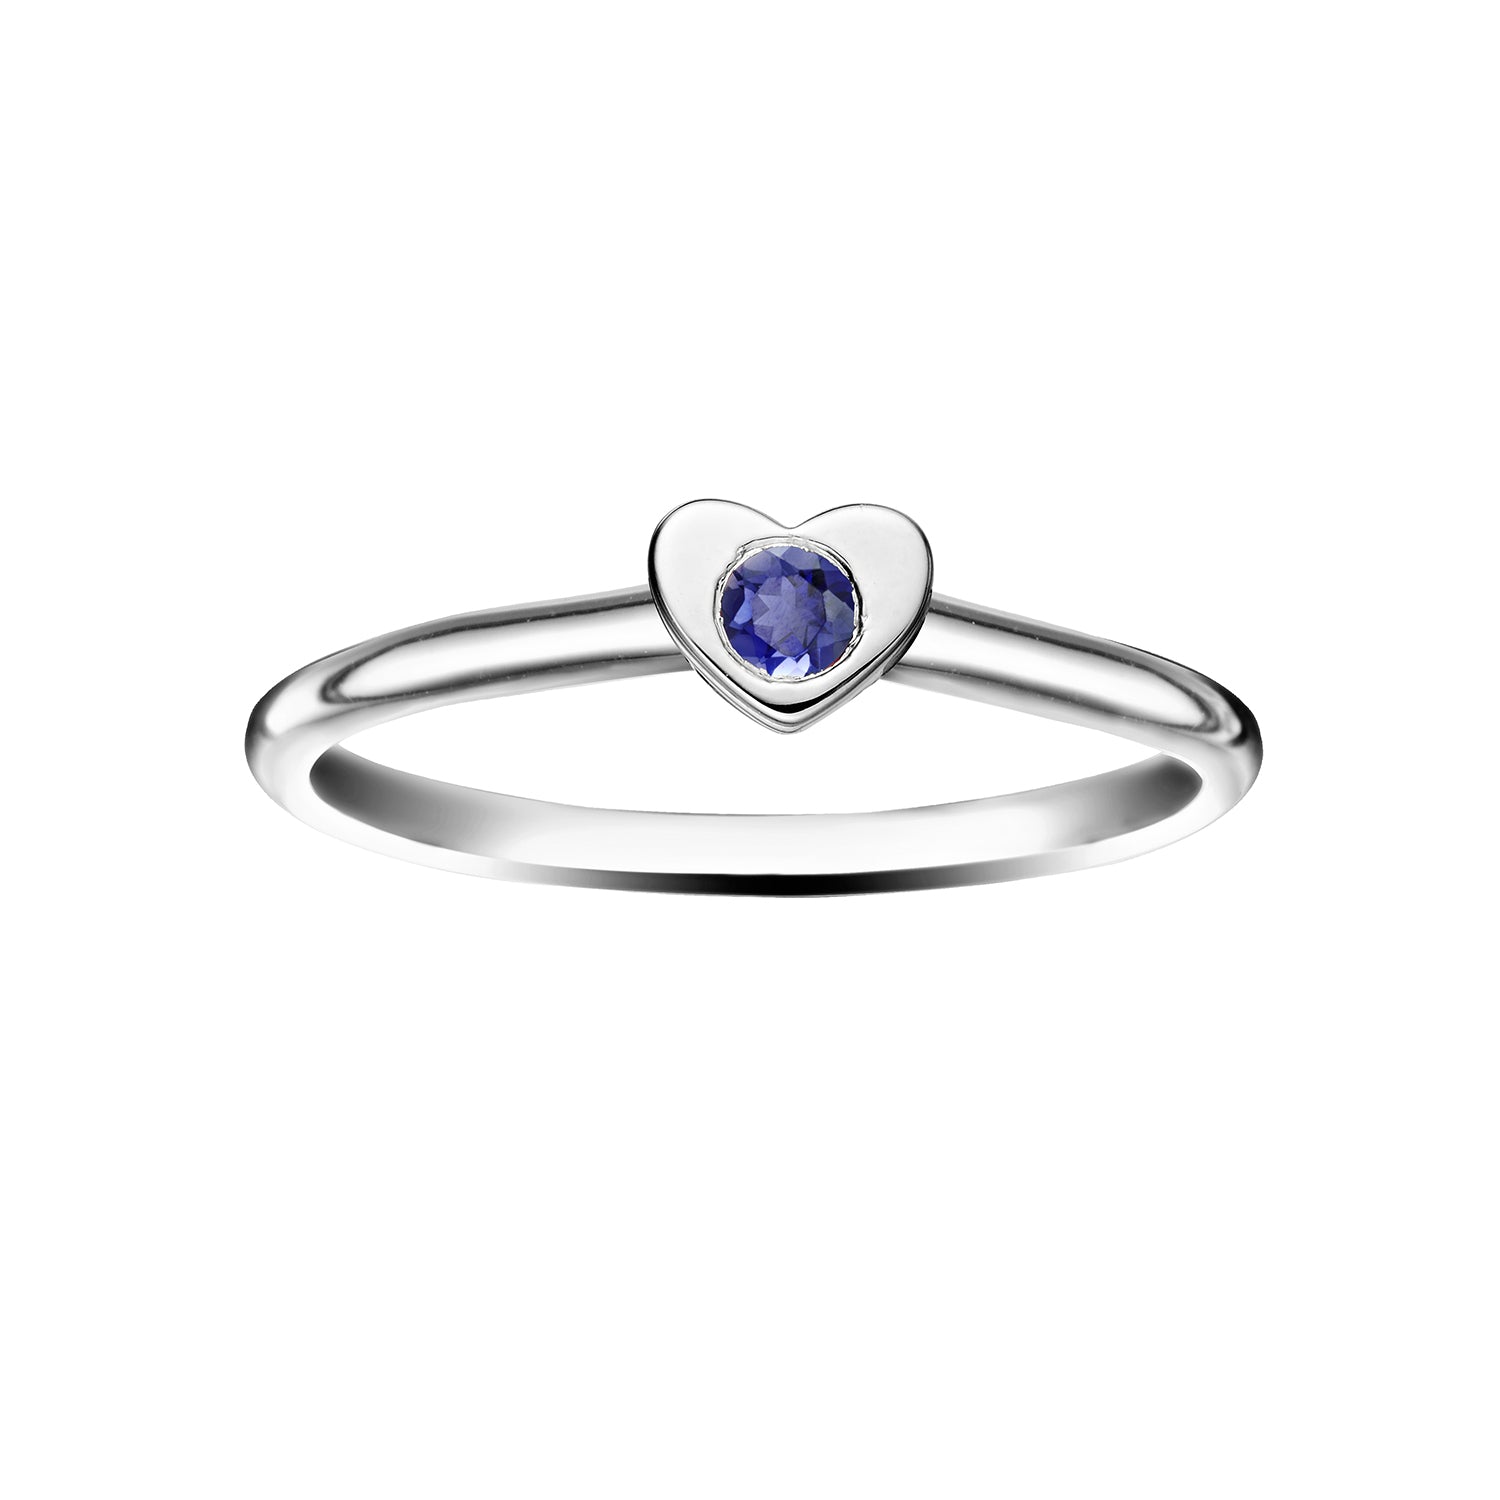 Polished Silver Heart Stacking Birthstone Rings - September / Iolite